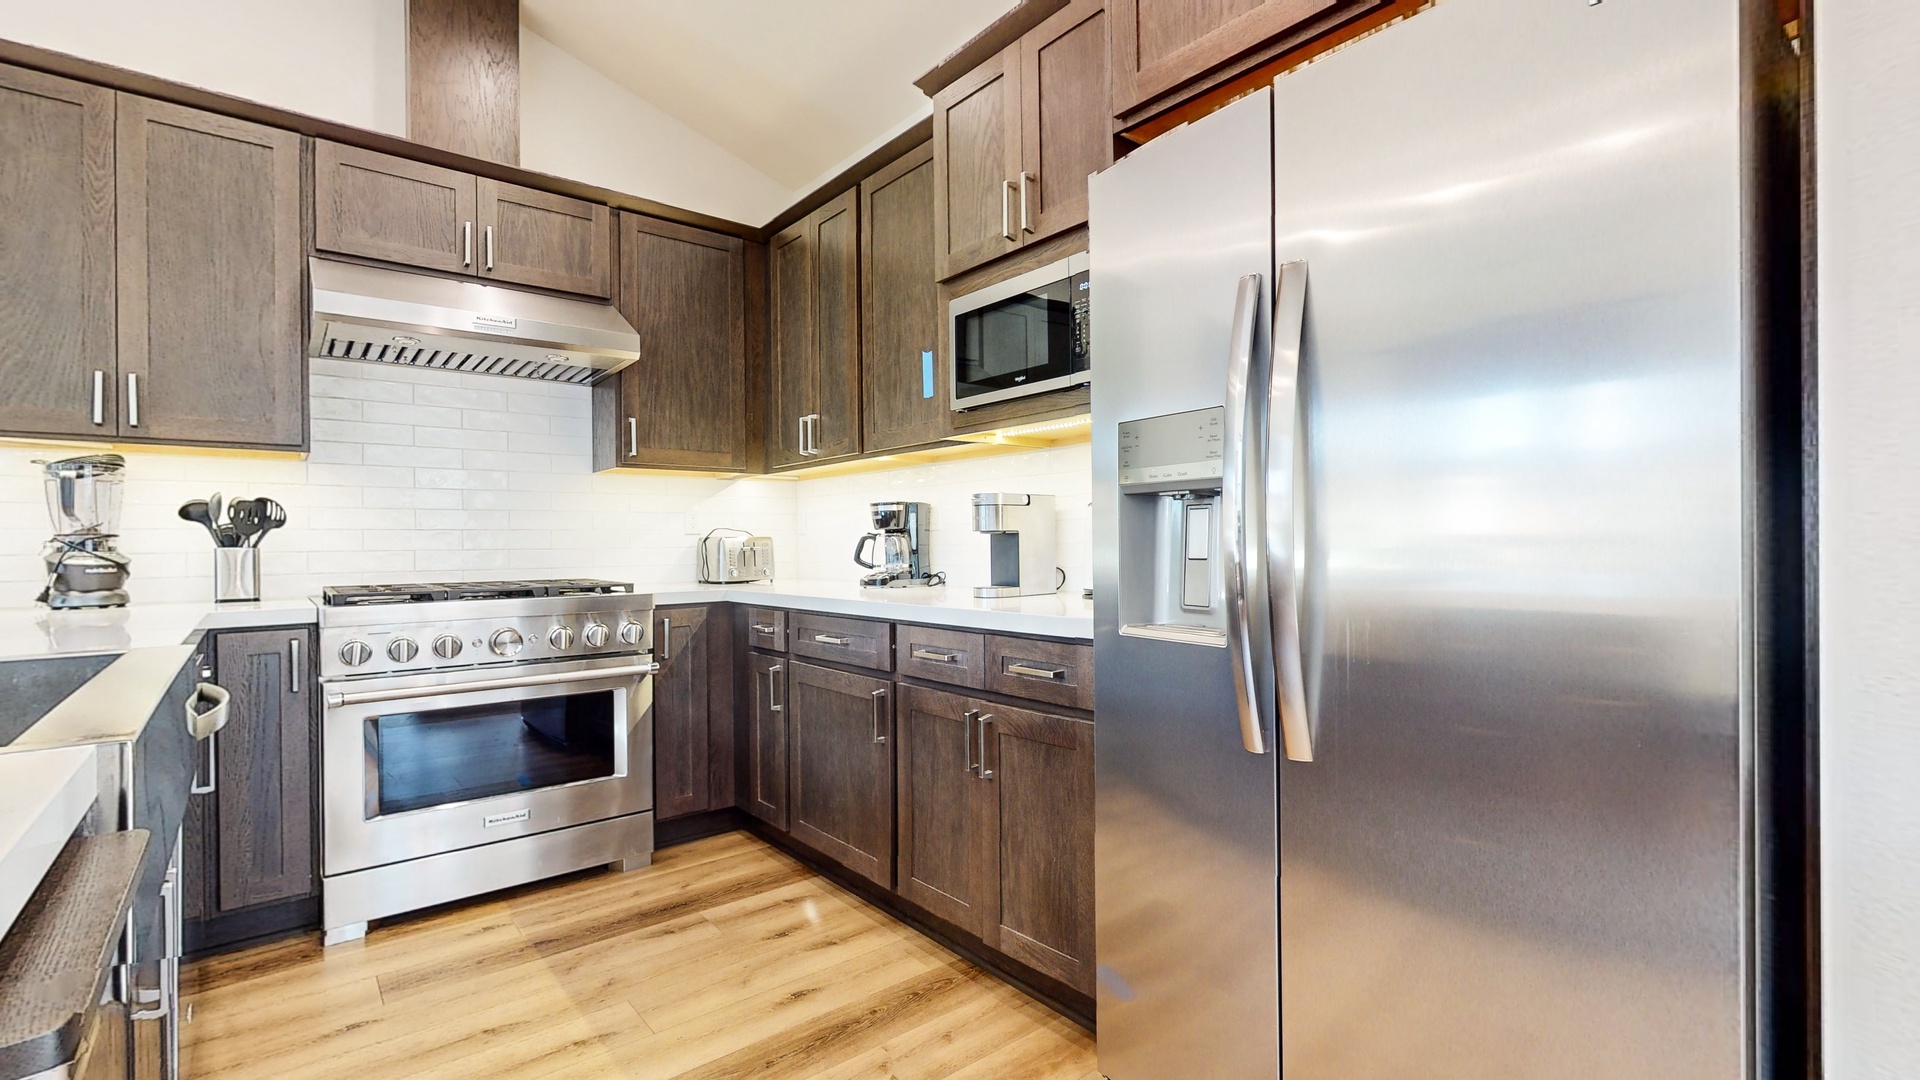 Fully equipped kitchen with stainless-steal appliances